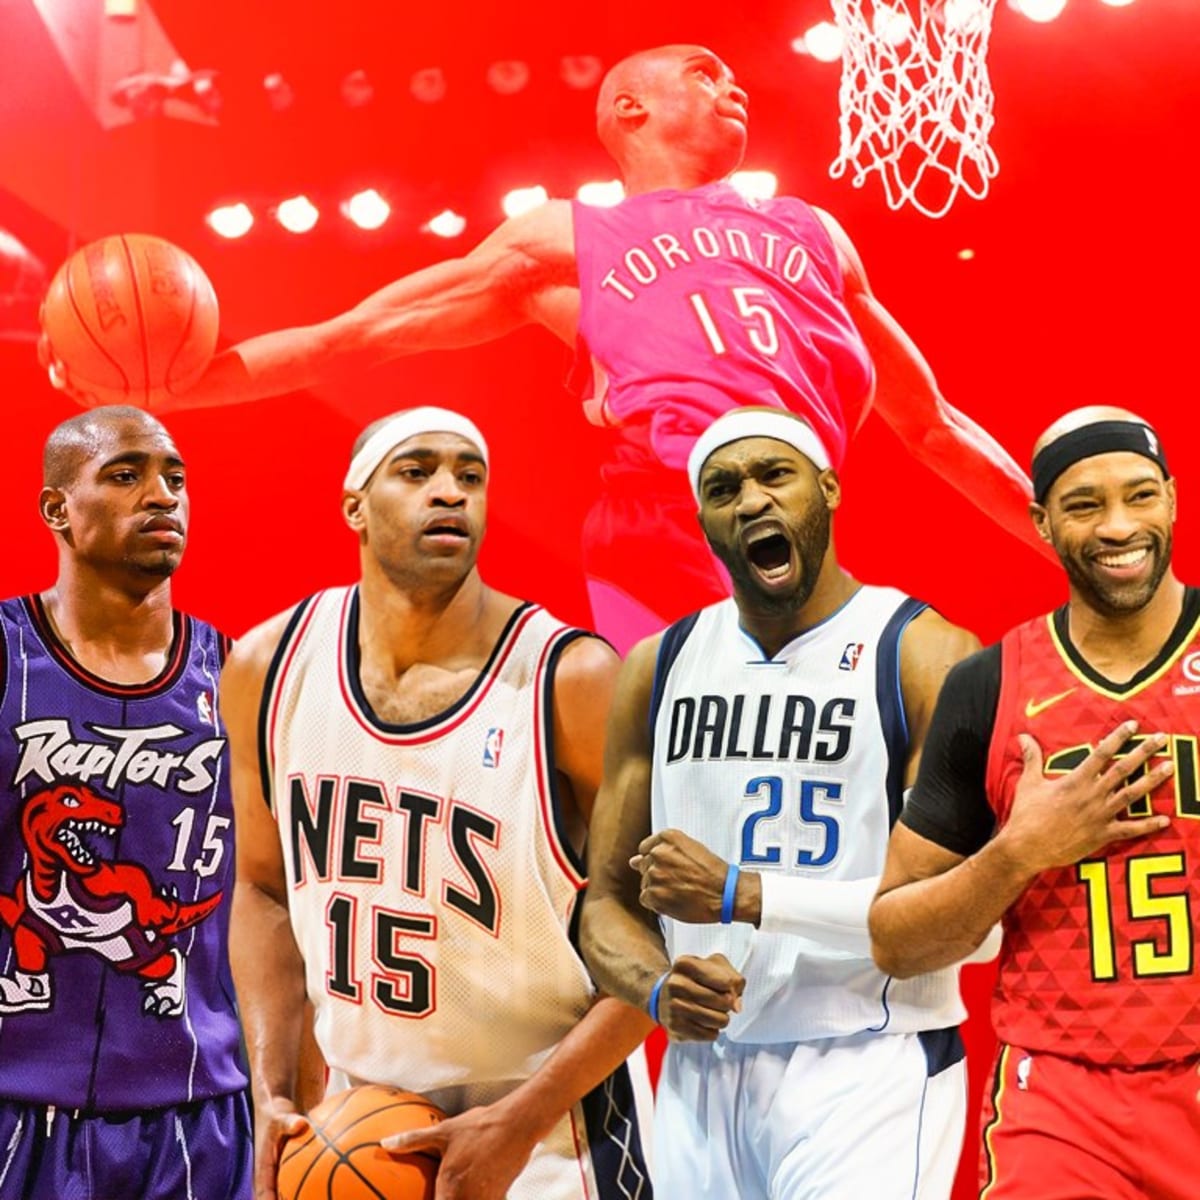 Vince Carter becomes first NBA player to play in four separate